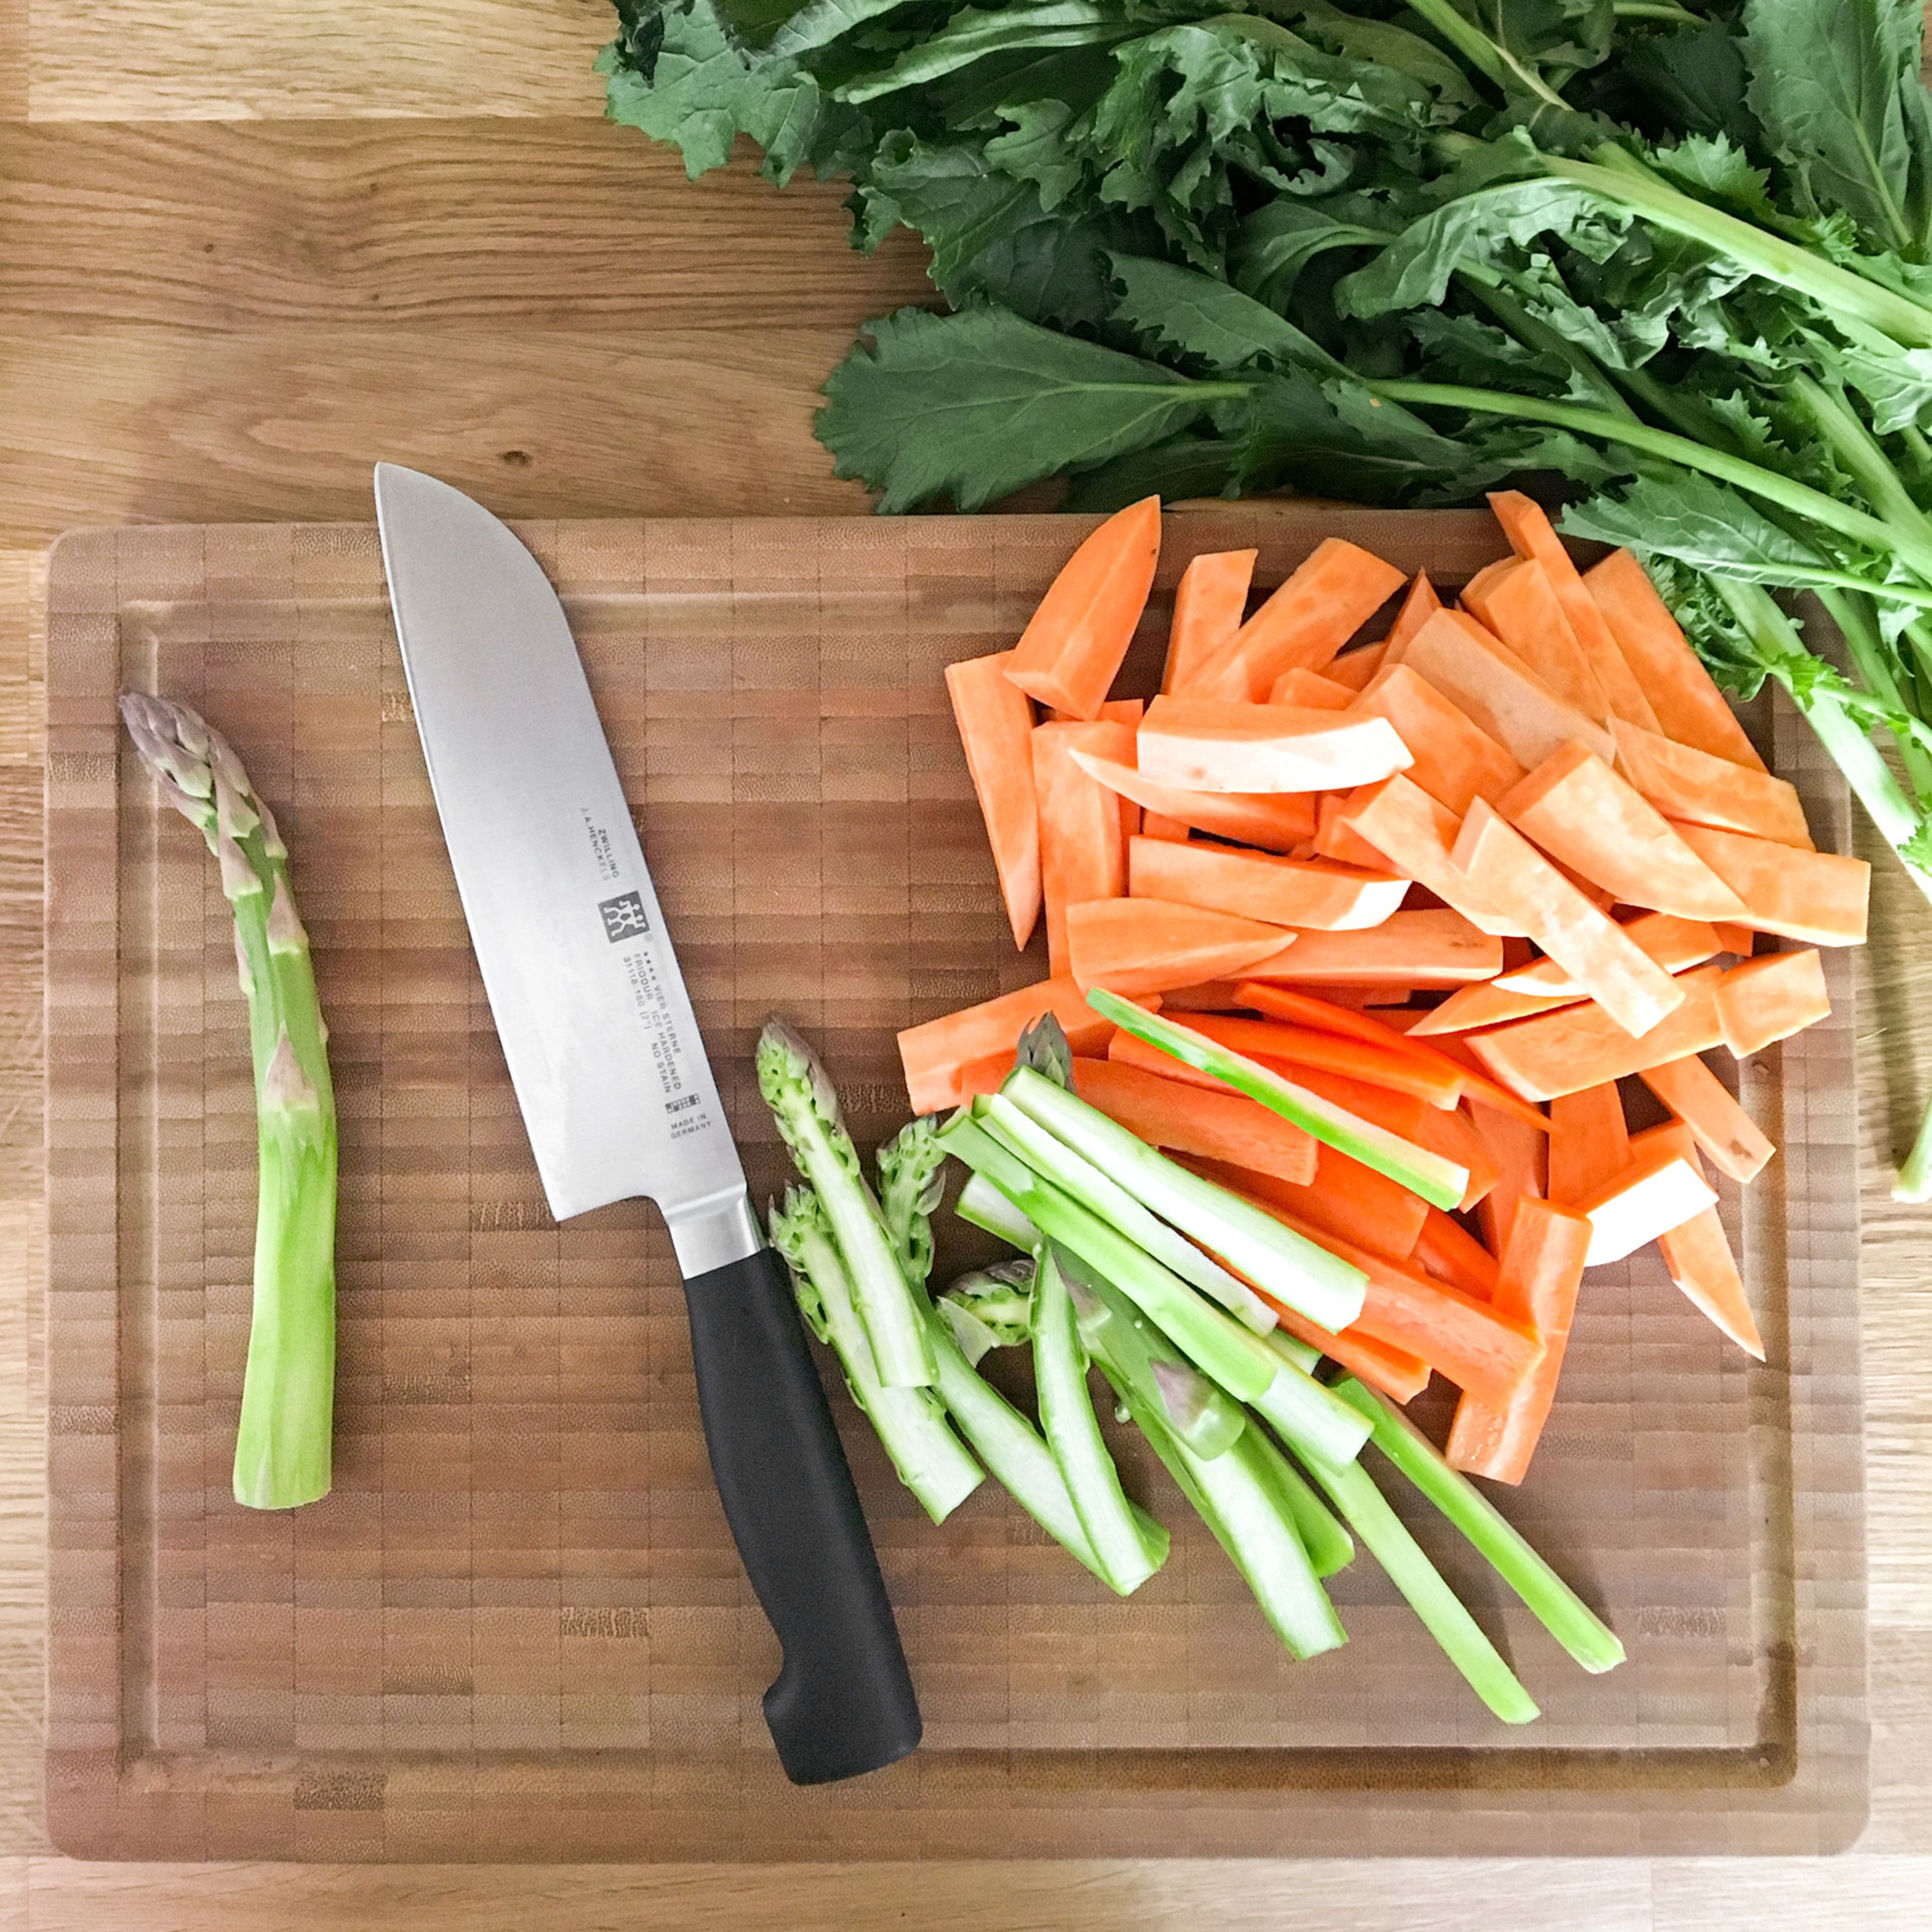 Peel and slice the sweet potato, carrot, and asparagus into strips. Cut turnip greens into small pieces. Roughly chop pistachios. Cube the cucumber. Deseed the pomegranate.